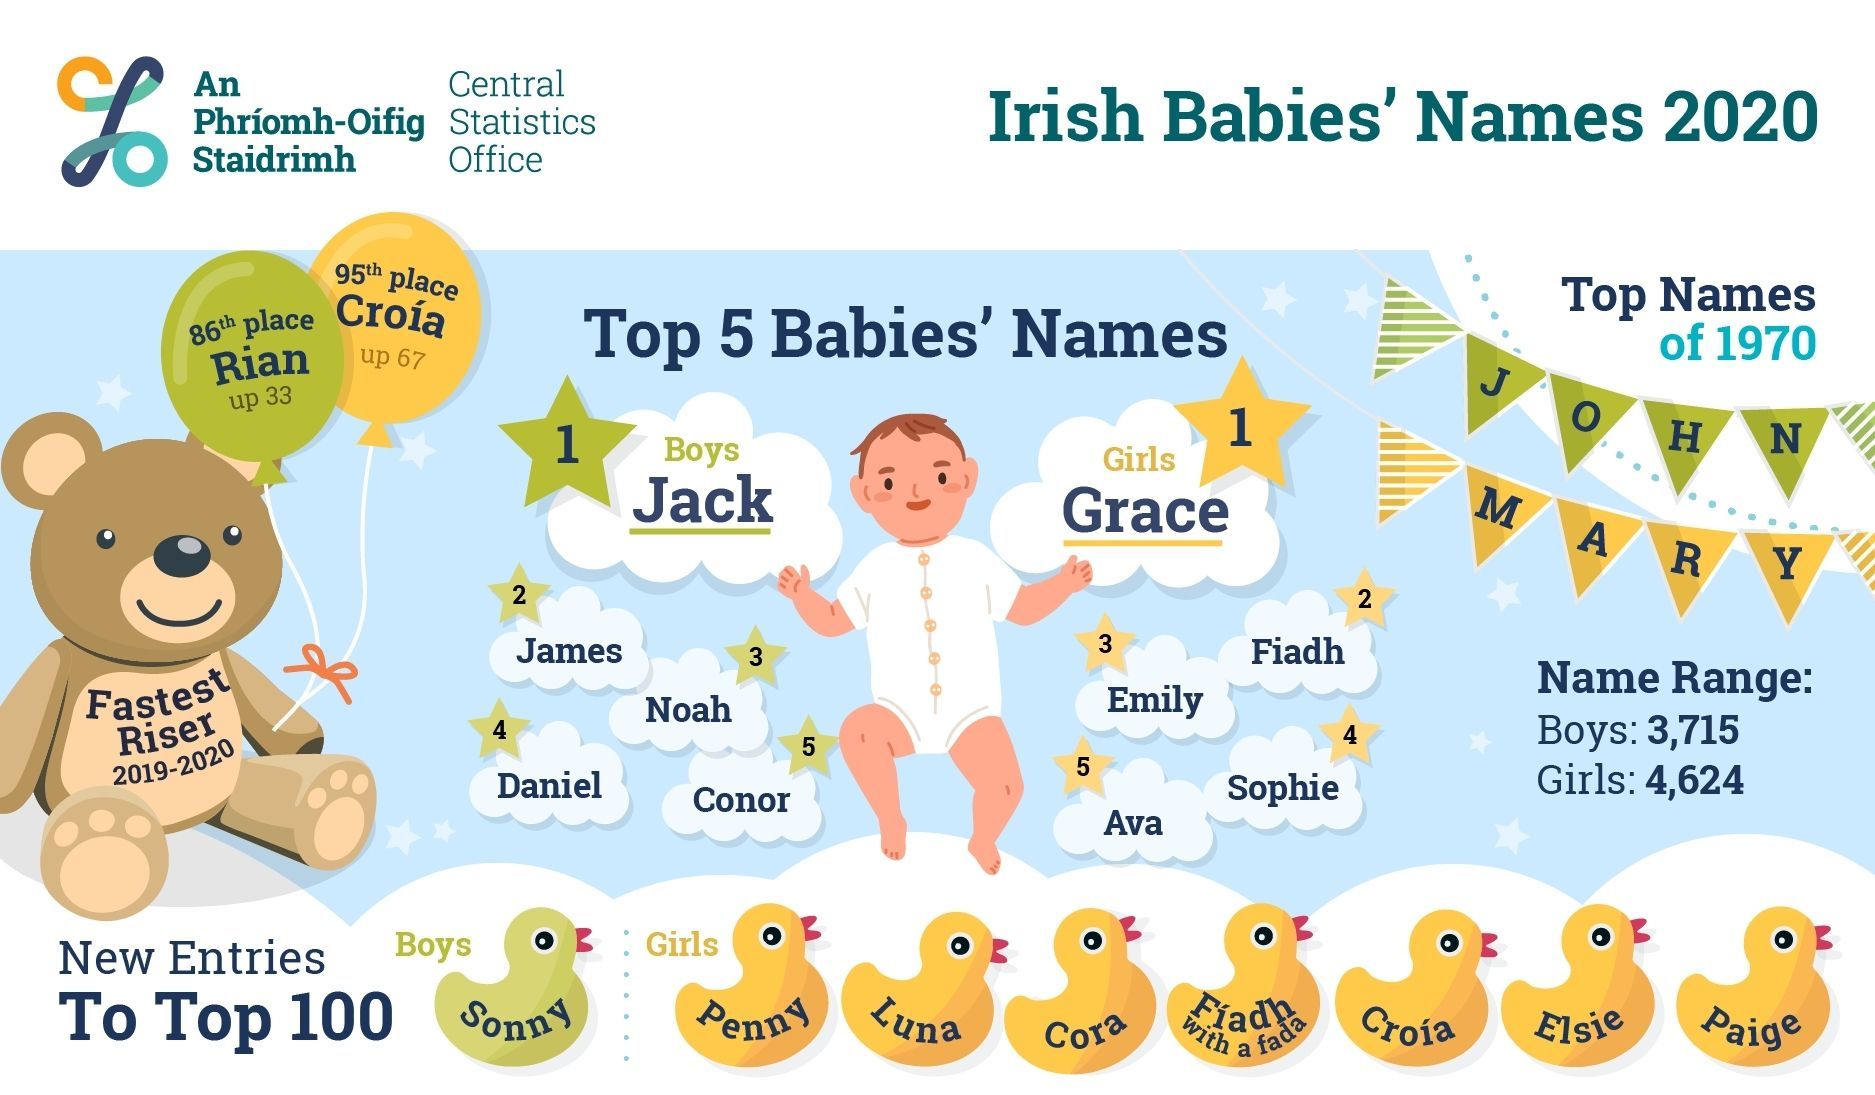 These were Ireland’s most popular baby names in 2020